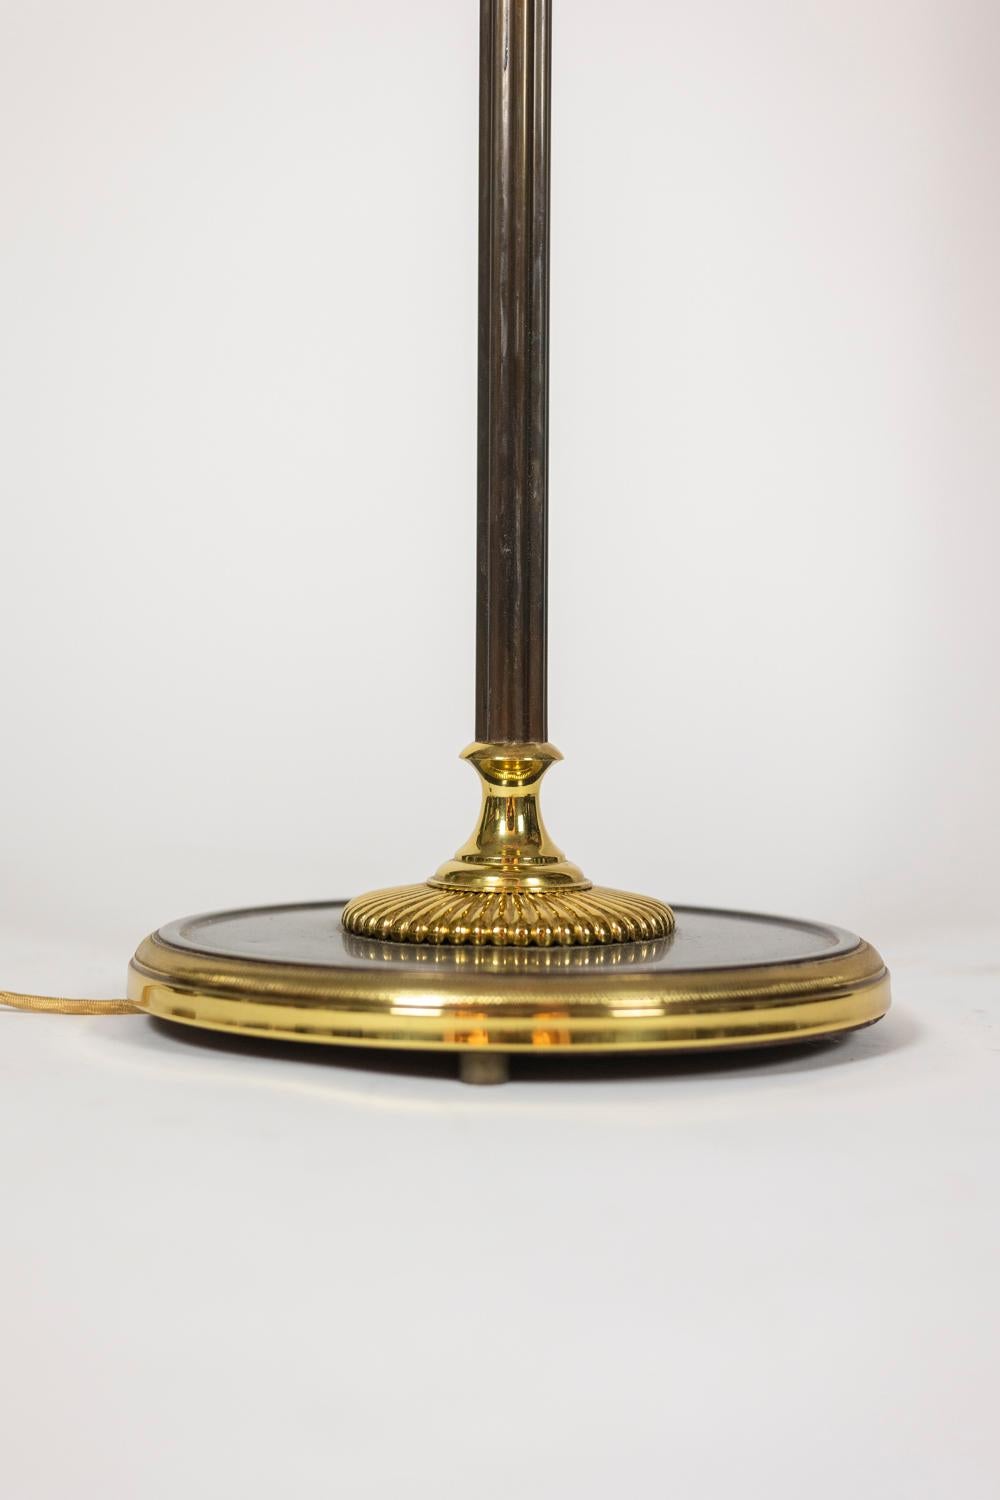 Maison Charles, by. 

Floor lamp, “Roseau” model in patinated bronze and gilded brass. Striated shaft decorated with a reed placed in its “Chambord” vase, ending in the upper part with a stylized acorn. Circular base decorated with a gadroon.